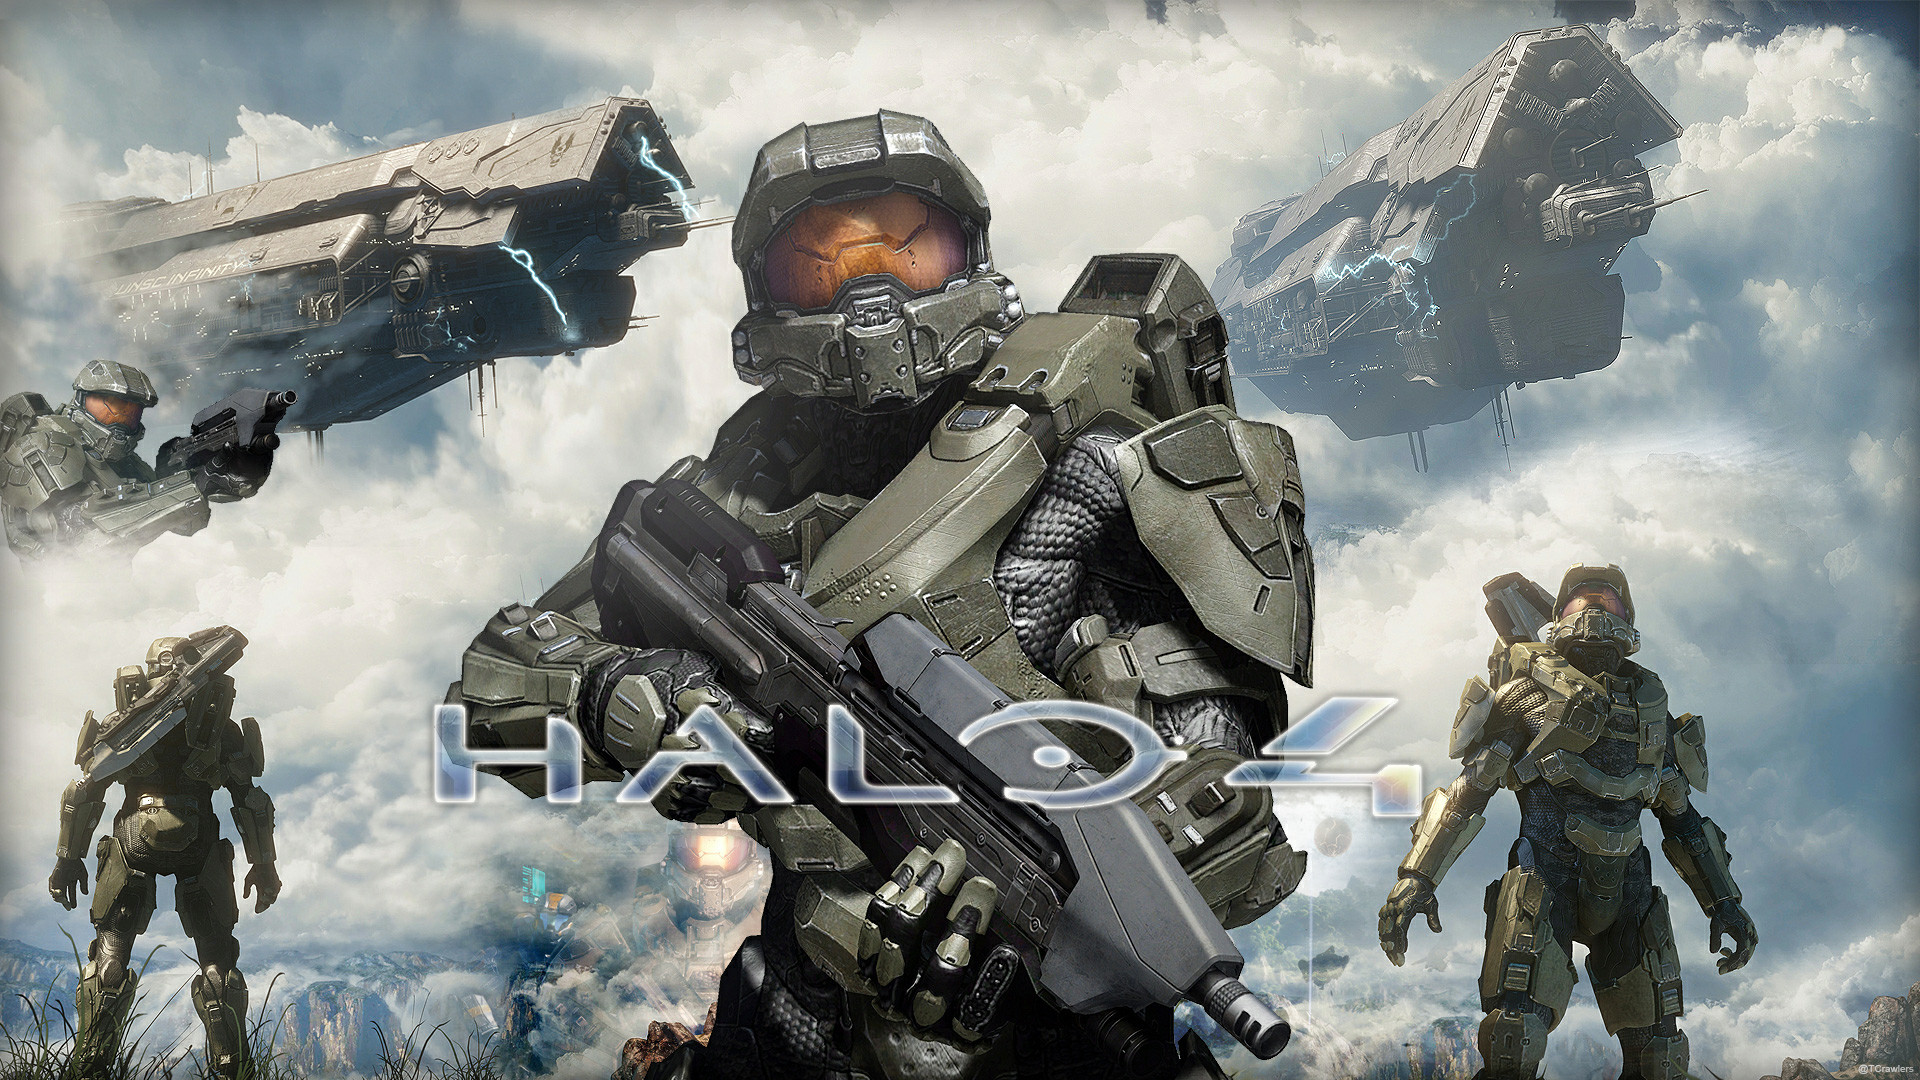 1920x1080 Halo 4 Wallpapers in HD